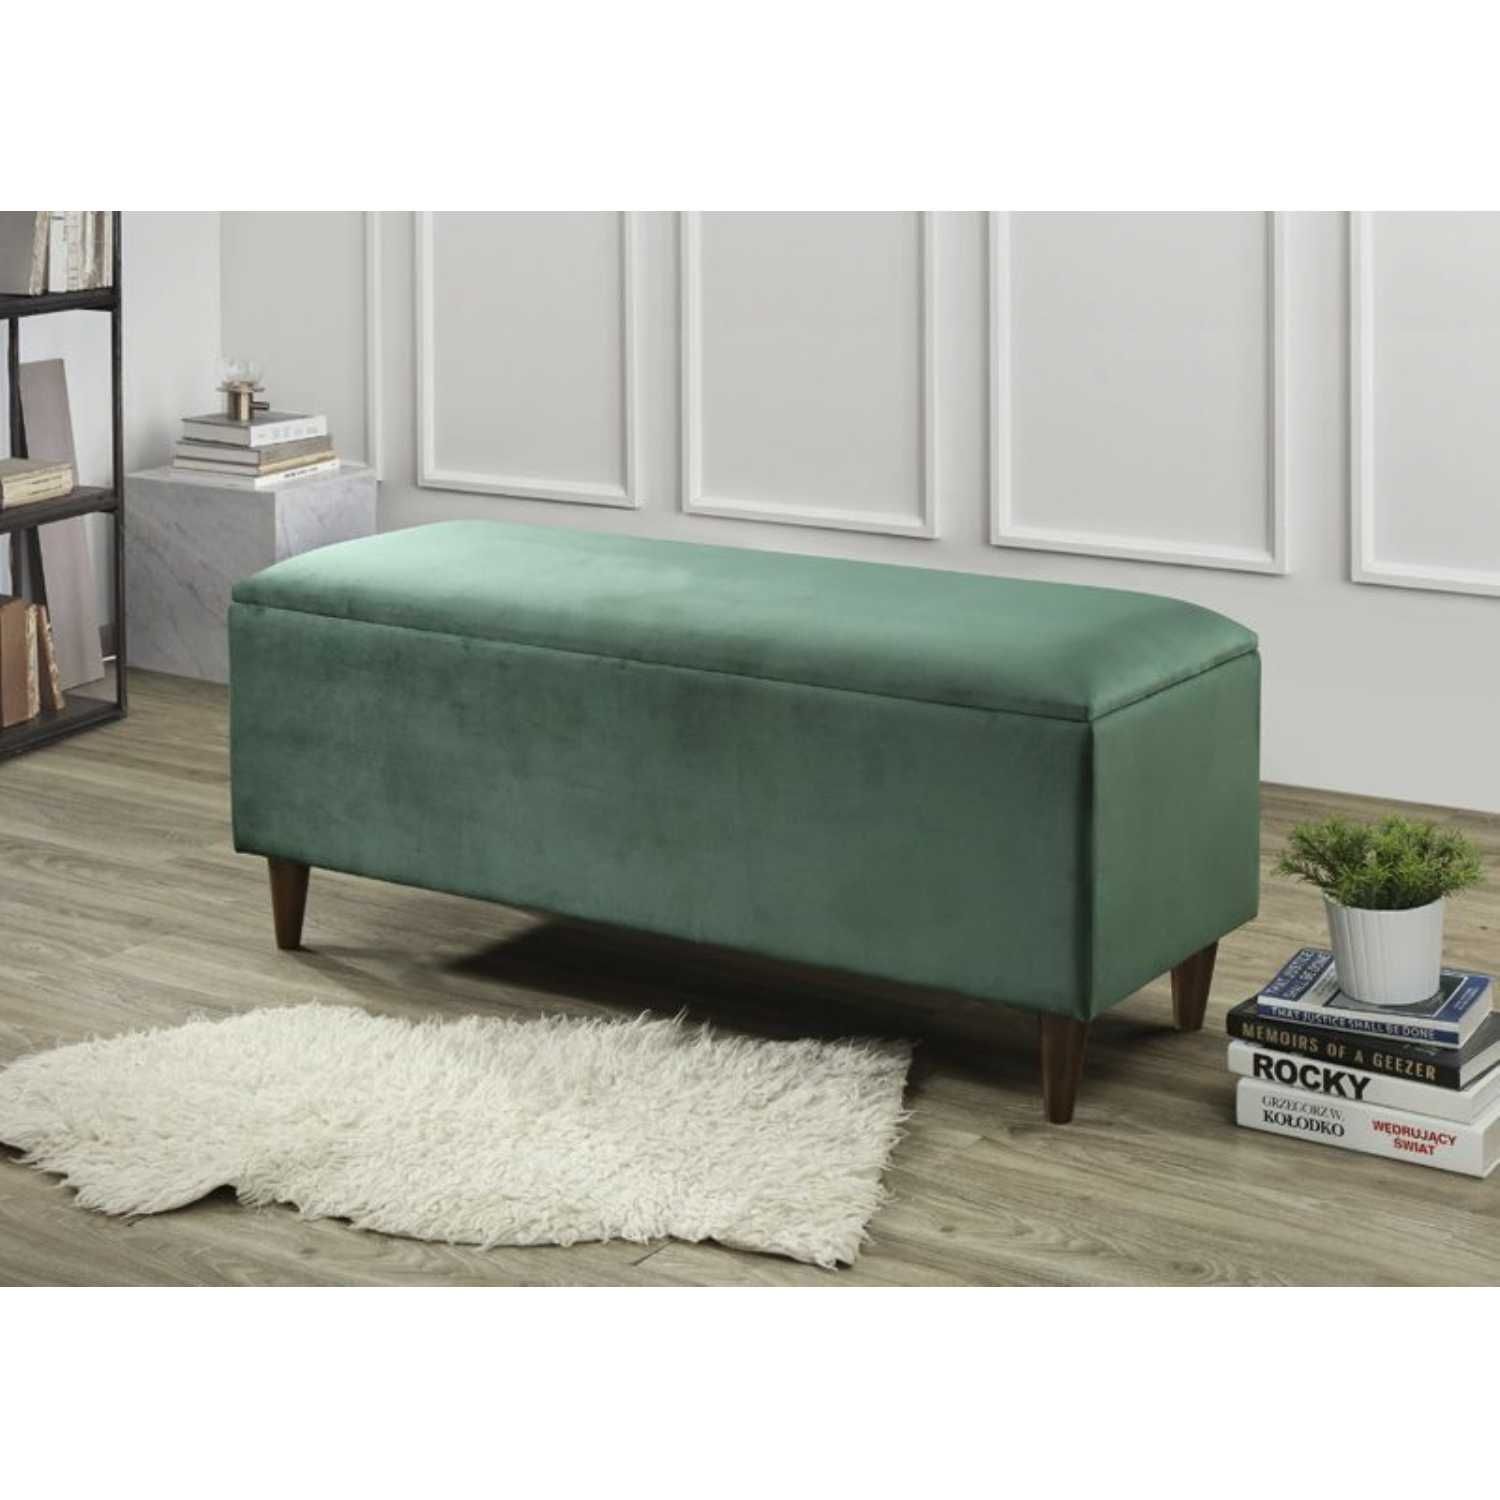 Emma Storage Ottoman Bench In Green Velvet Fabric With Dark Wood Legs In Red Fabric Square Storage Ottomans With Pillows (View 11 of 20)